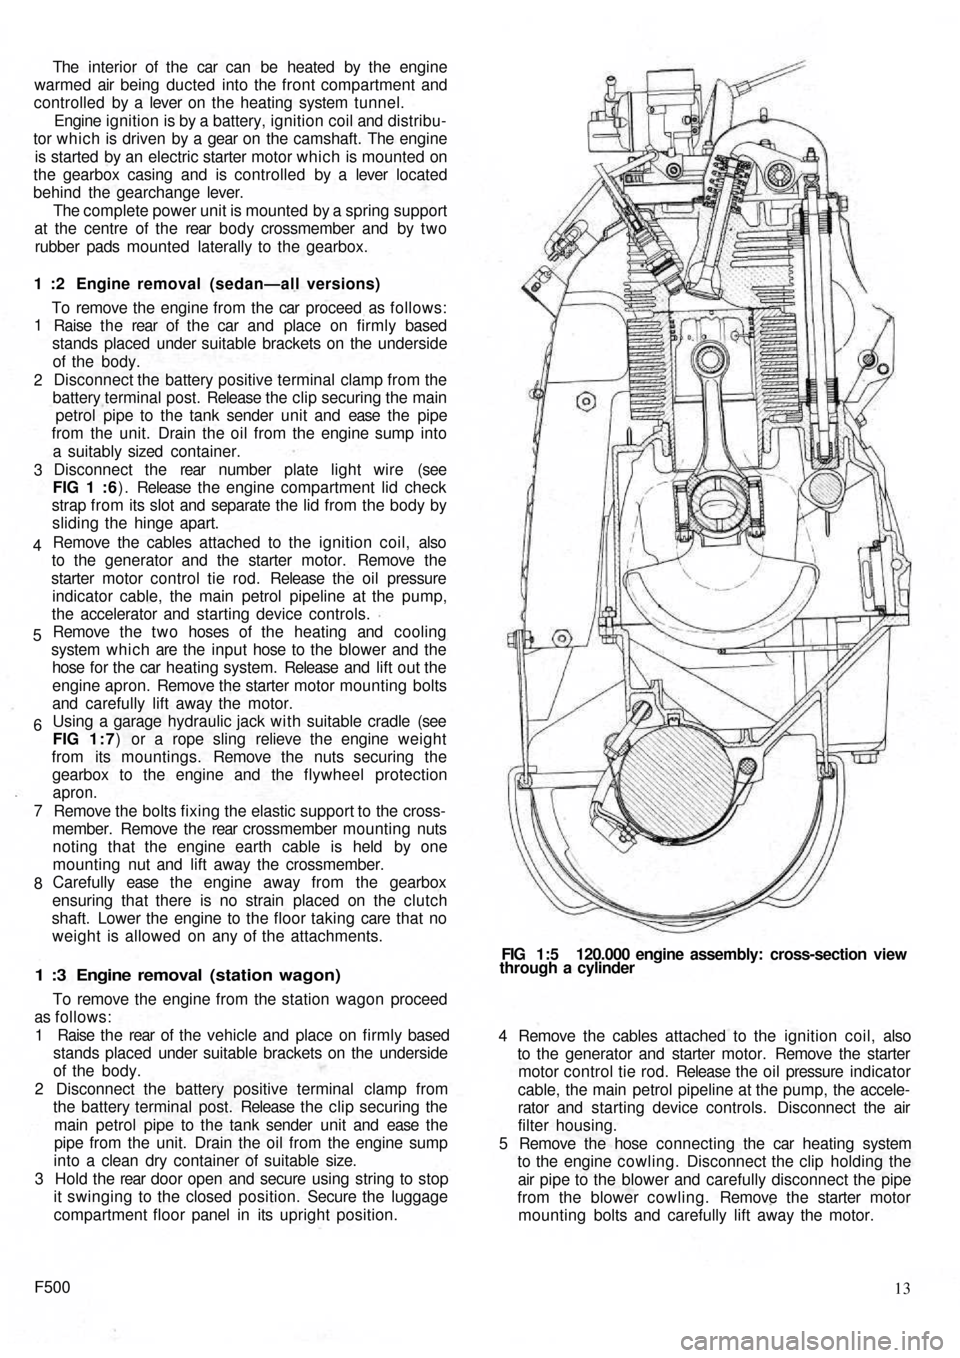 FIAT 500 1964 1.G Workshop Manual The  interior of the  car can  be heated by the engine
warmed air being ducted into the front compartment and
controlled  by a  lever on the heating system tunnel.
Engine ignition is by a battery, ign